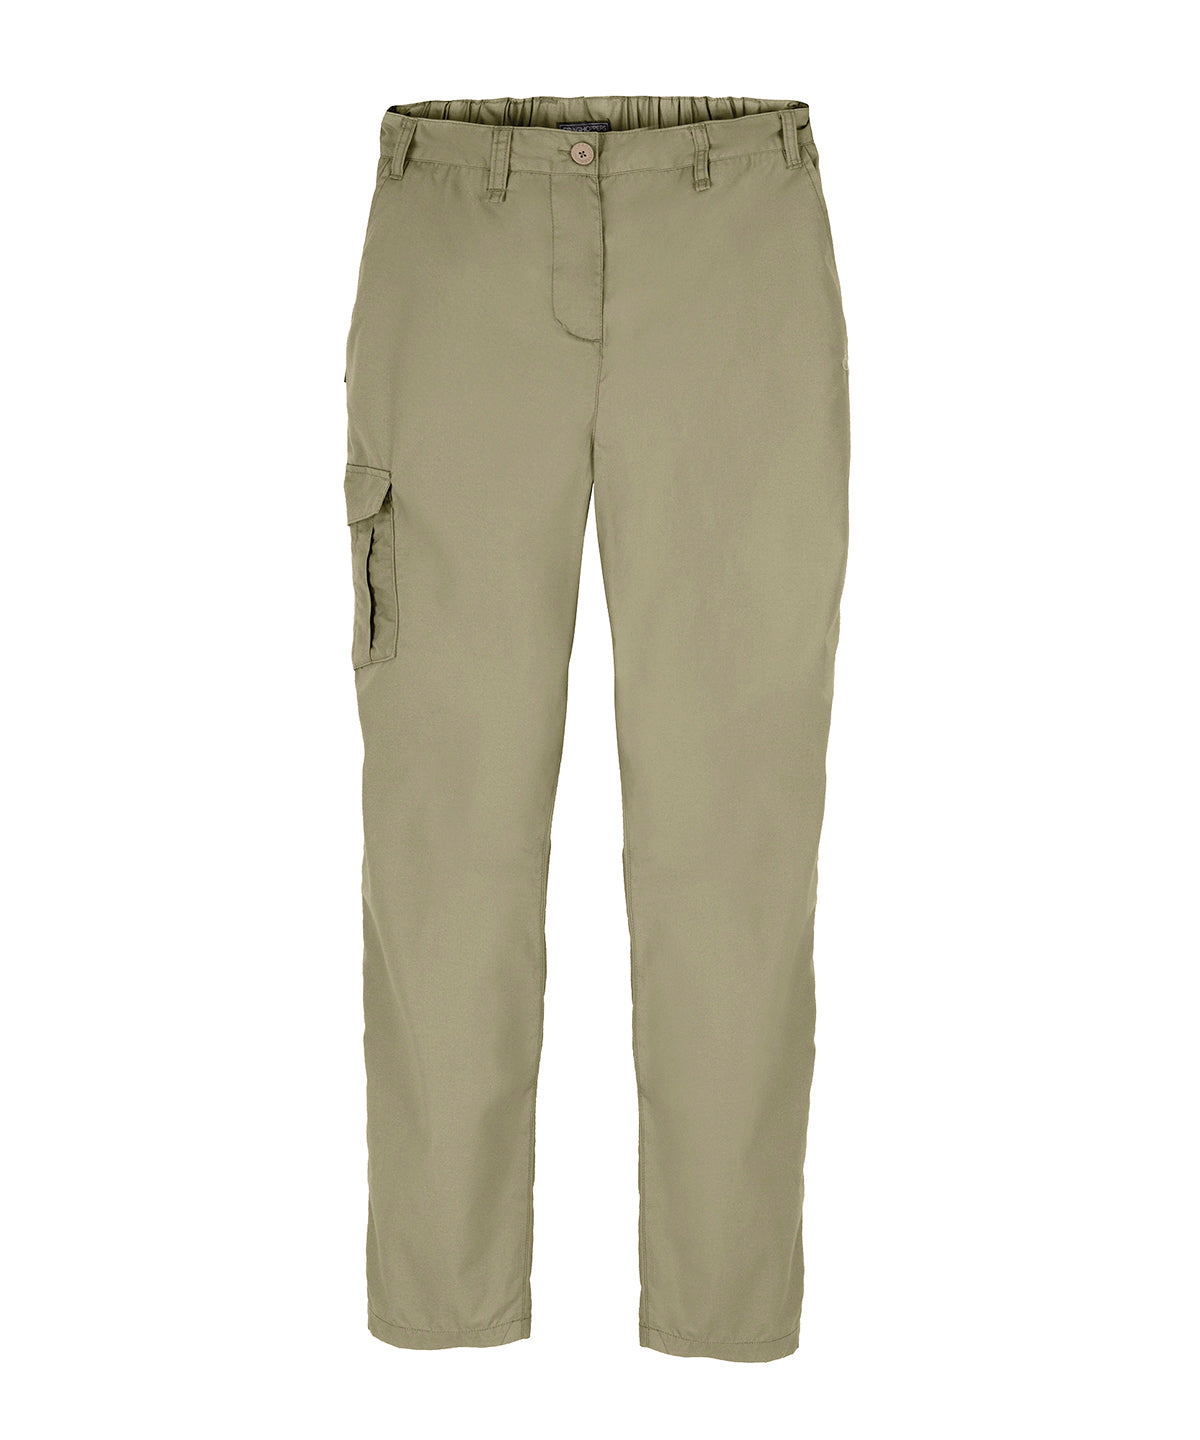 Personalised Trousers - Light Grey Craghoppers Expert women’s Kiwi trousers